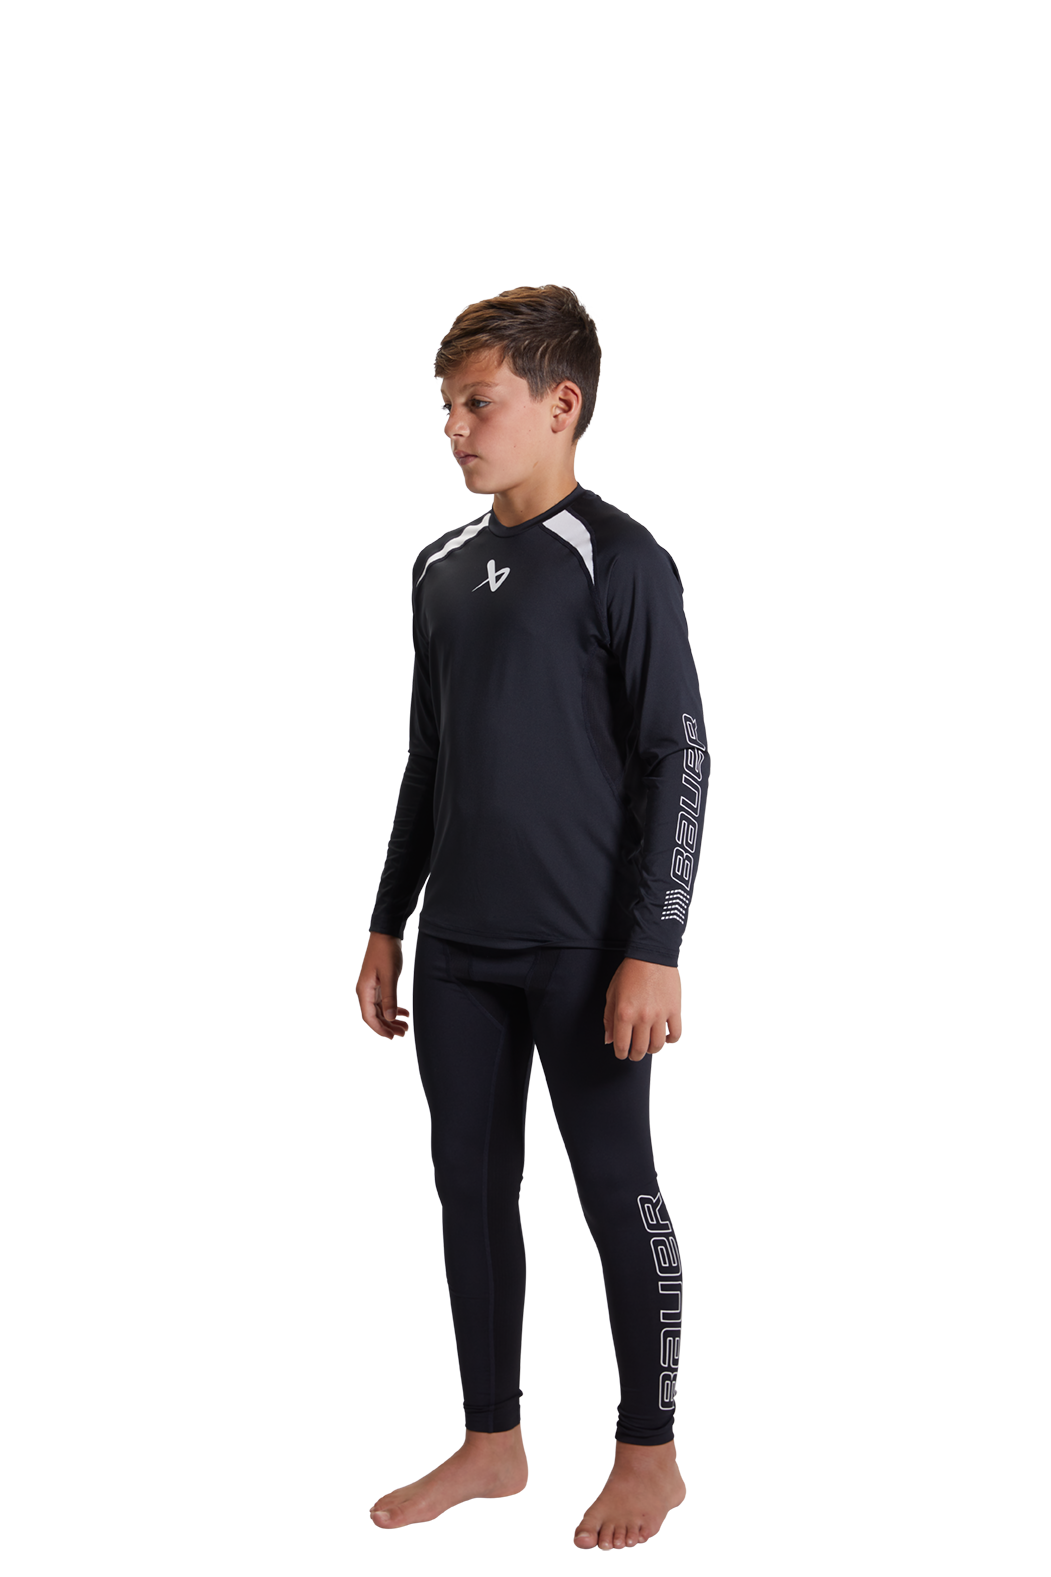 Youth NeckProtect Long Sleeve Hockey Baselayer Neck Guard Top from